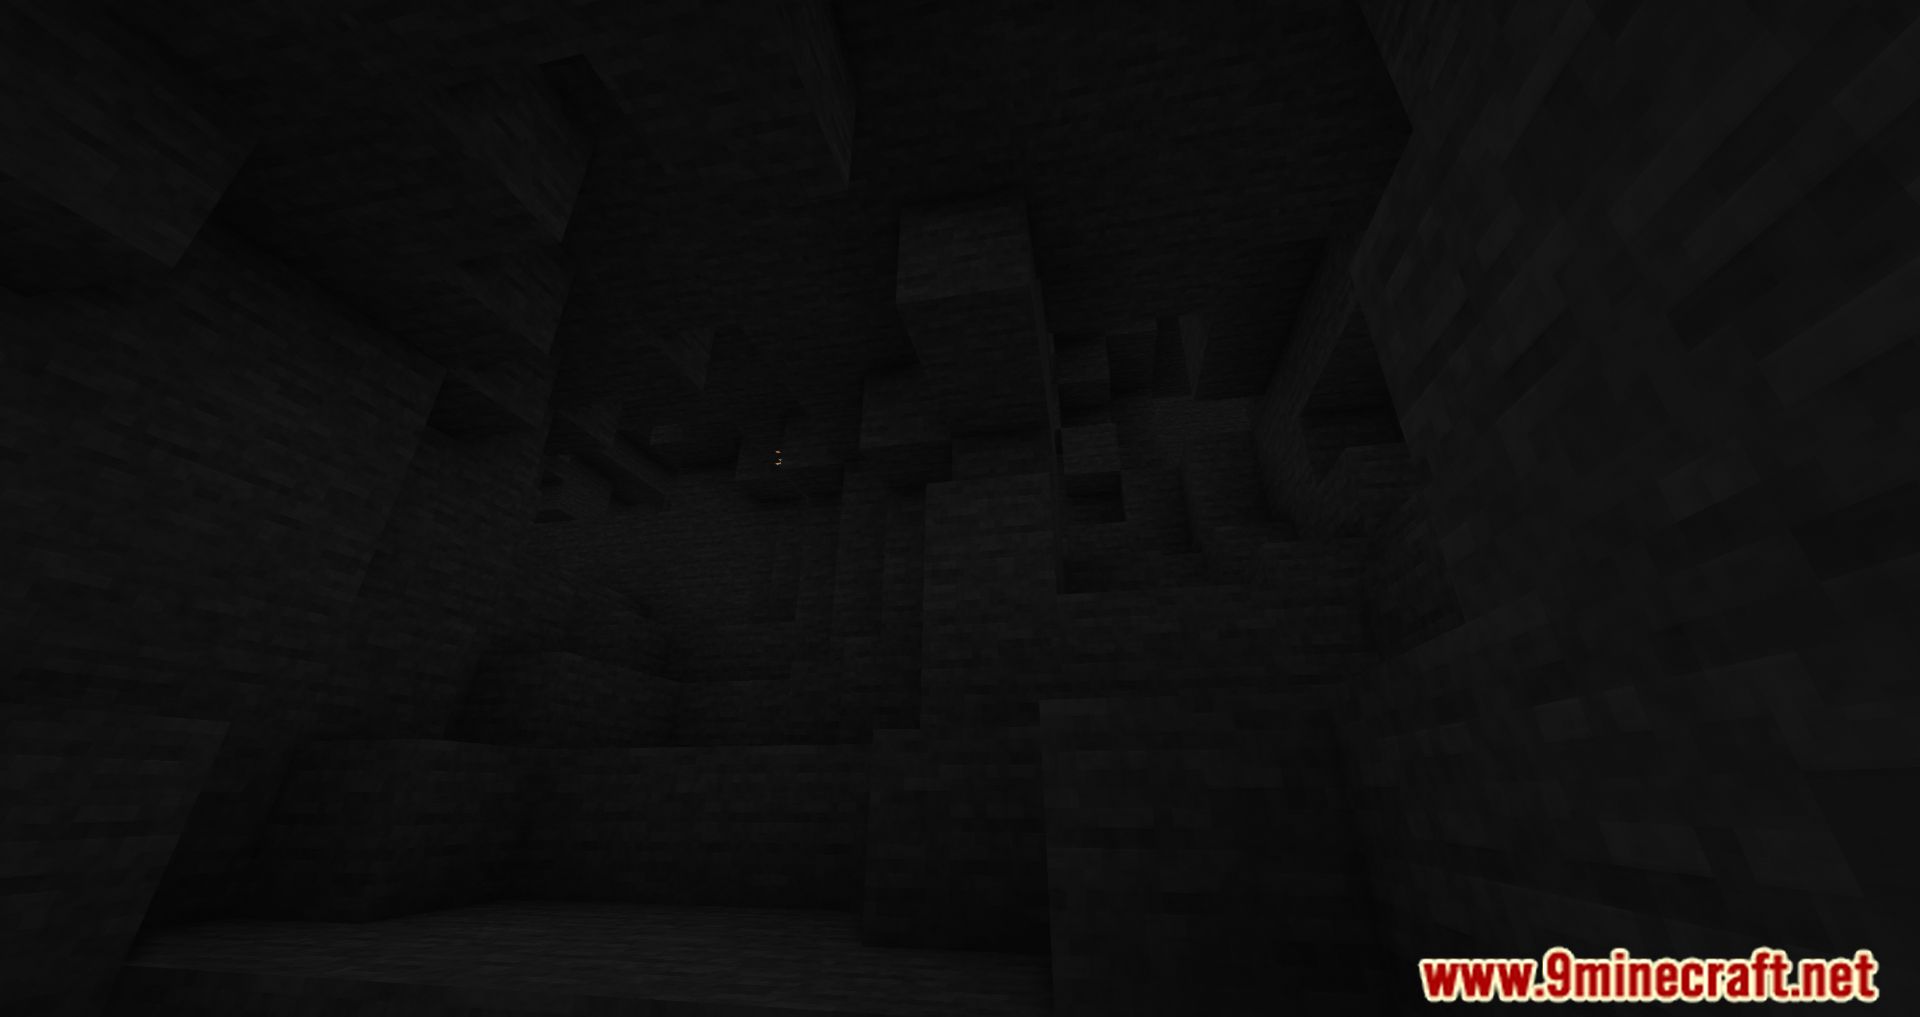 Cave Generator Mod (1.16.5, 1.12.2) - Fully Customize Mojang's Tunnels 5